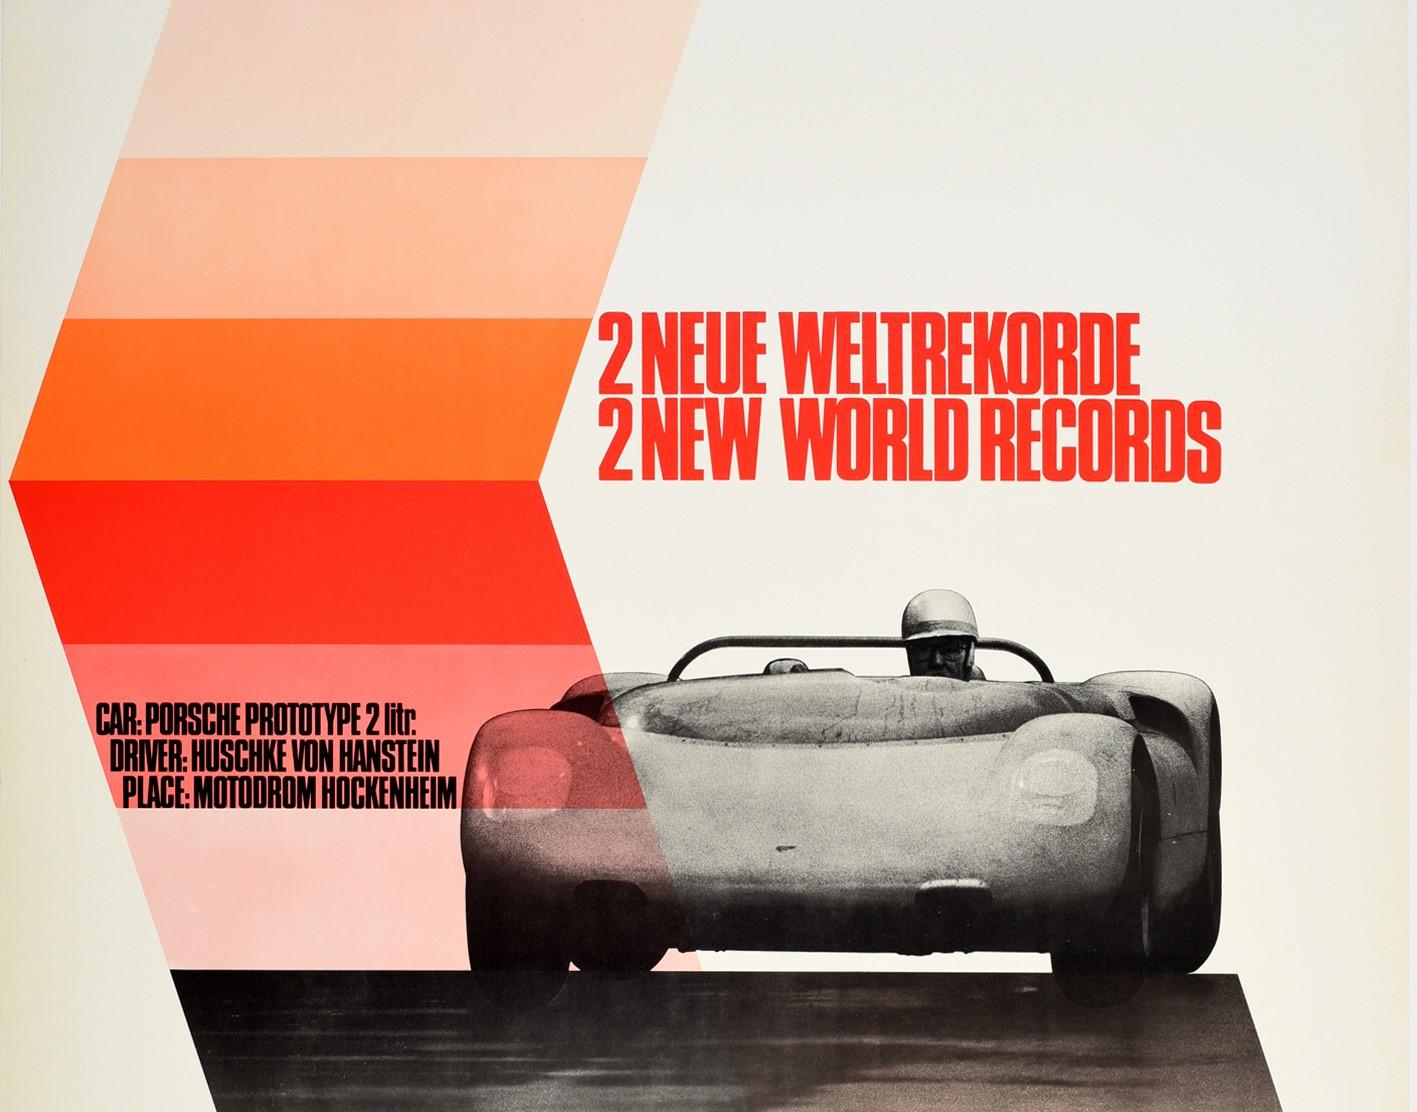 Original vintage advertising poster for Porsche promoting their 2 Neue-Weltrekorde / 2 New World Records featuring a great design by Erich Strenger (1922-1993) of a Porsche Prototype 2 litre car driven by the German racing driver Huschke von